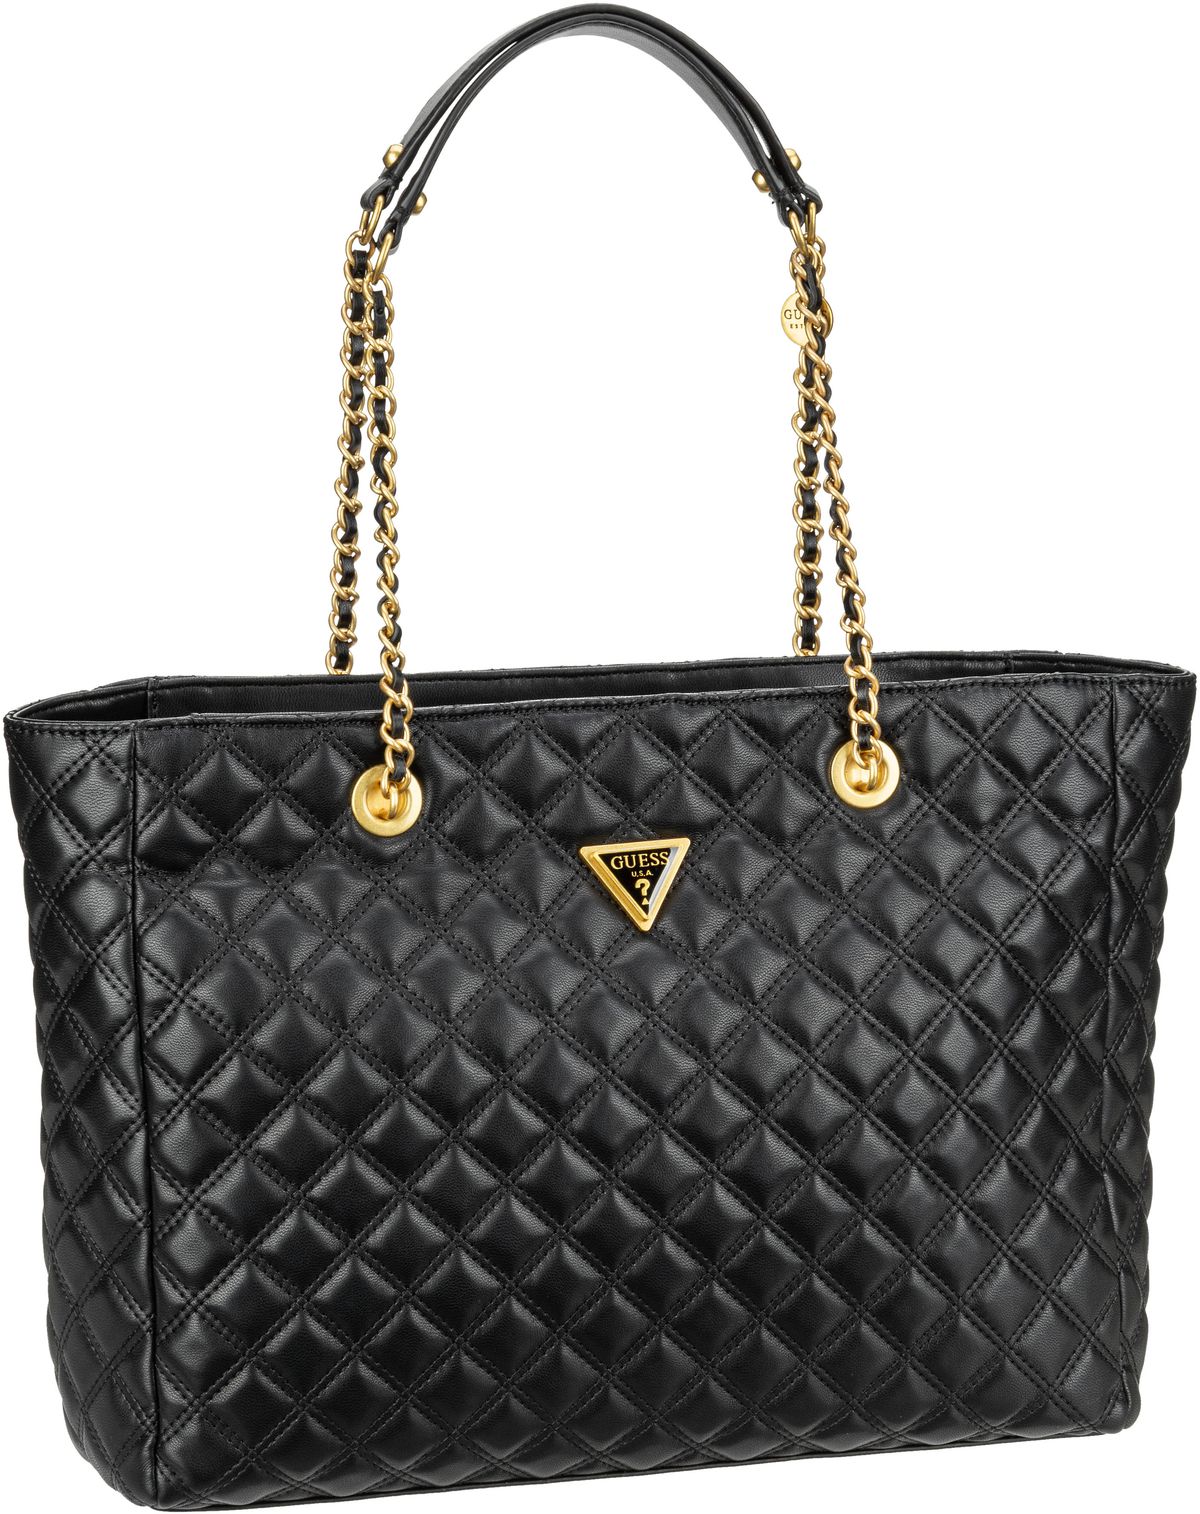 Guess Giully Tote - Black